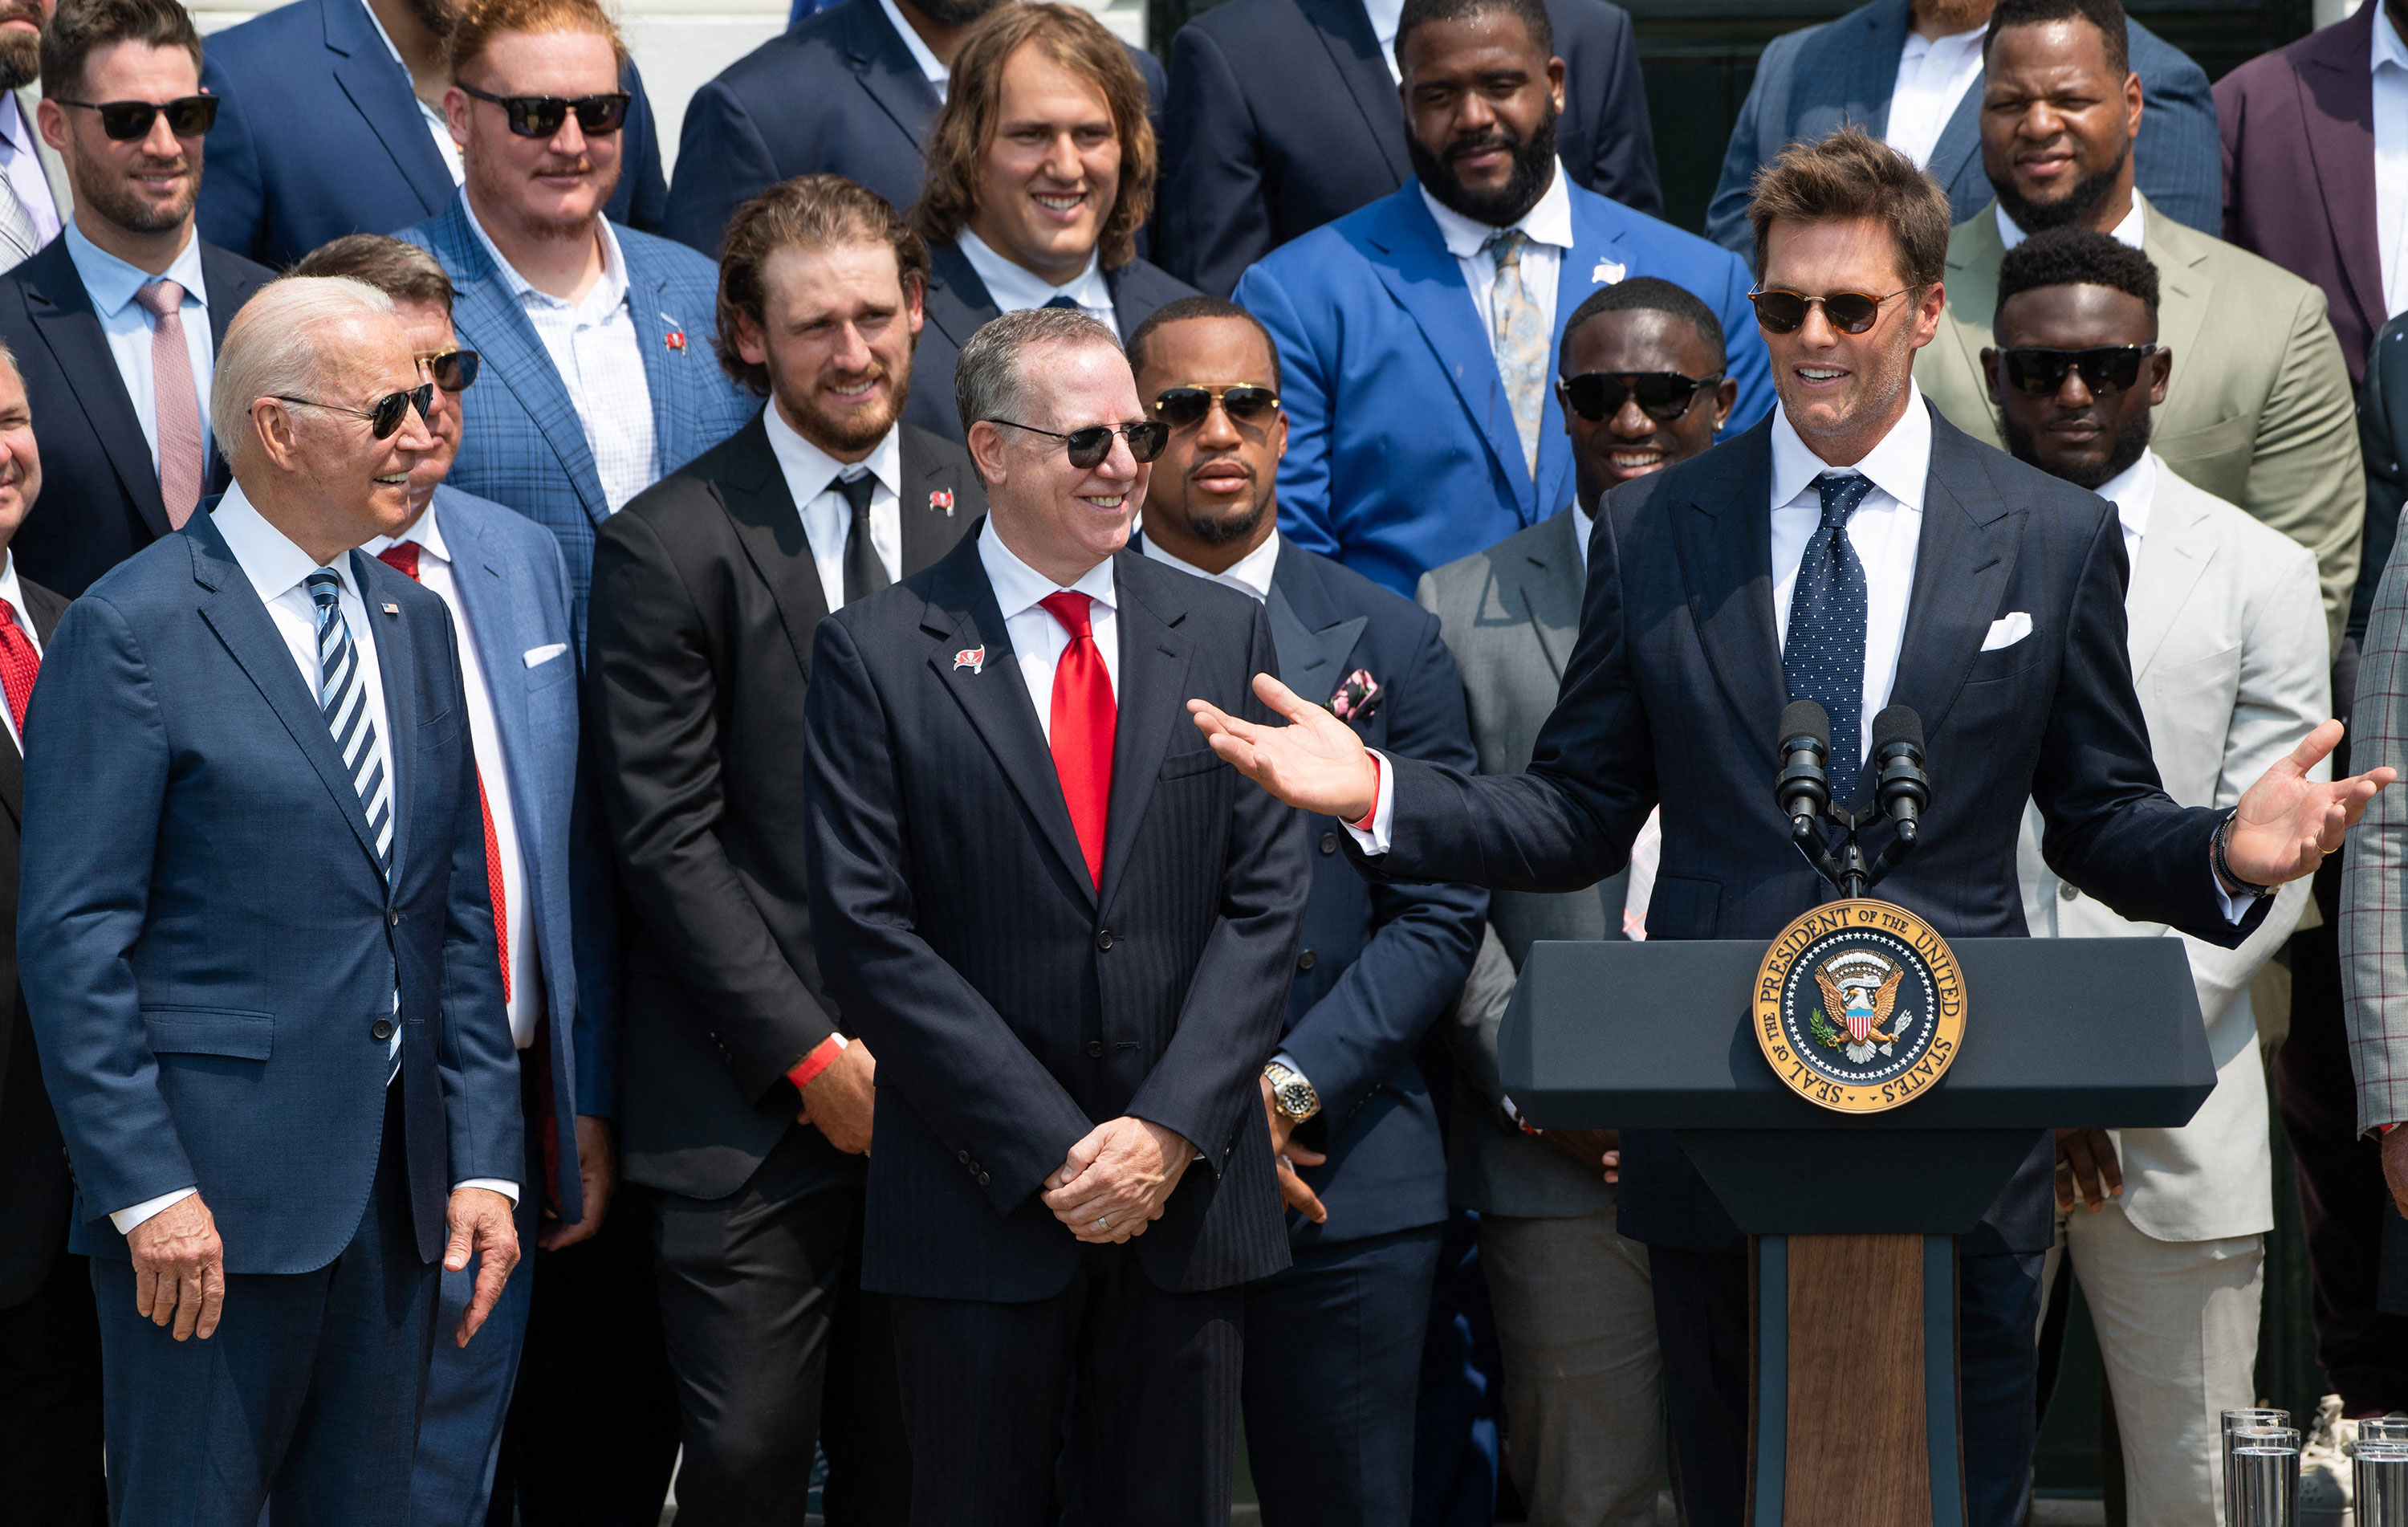 President Joe Biden, left, and Tampa Bay Buccaneers owner Bryan Glazer, center, listen as Tom Brady speaks during a ceremony at the White House honoring the Buccaneers' Super Bowl win in July.